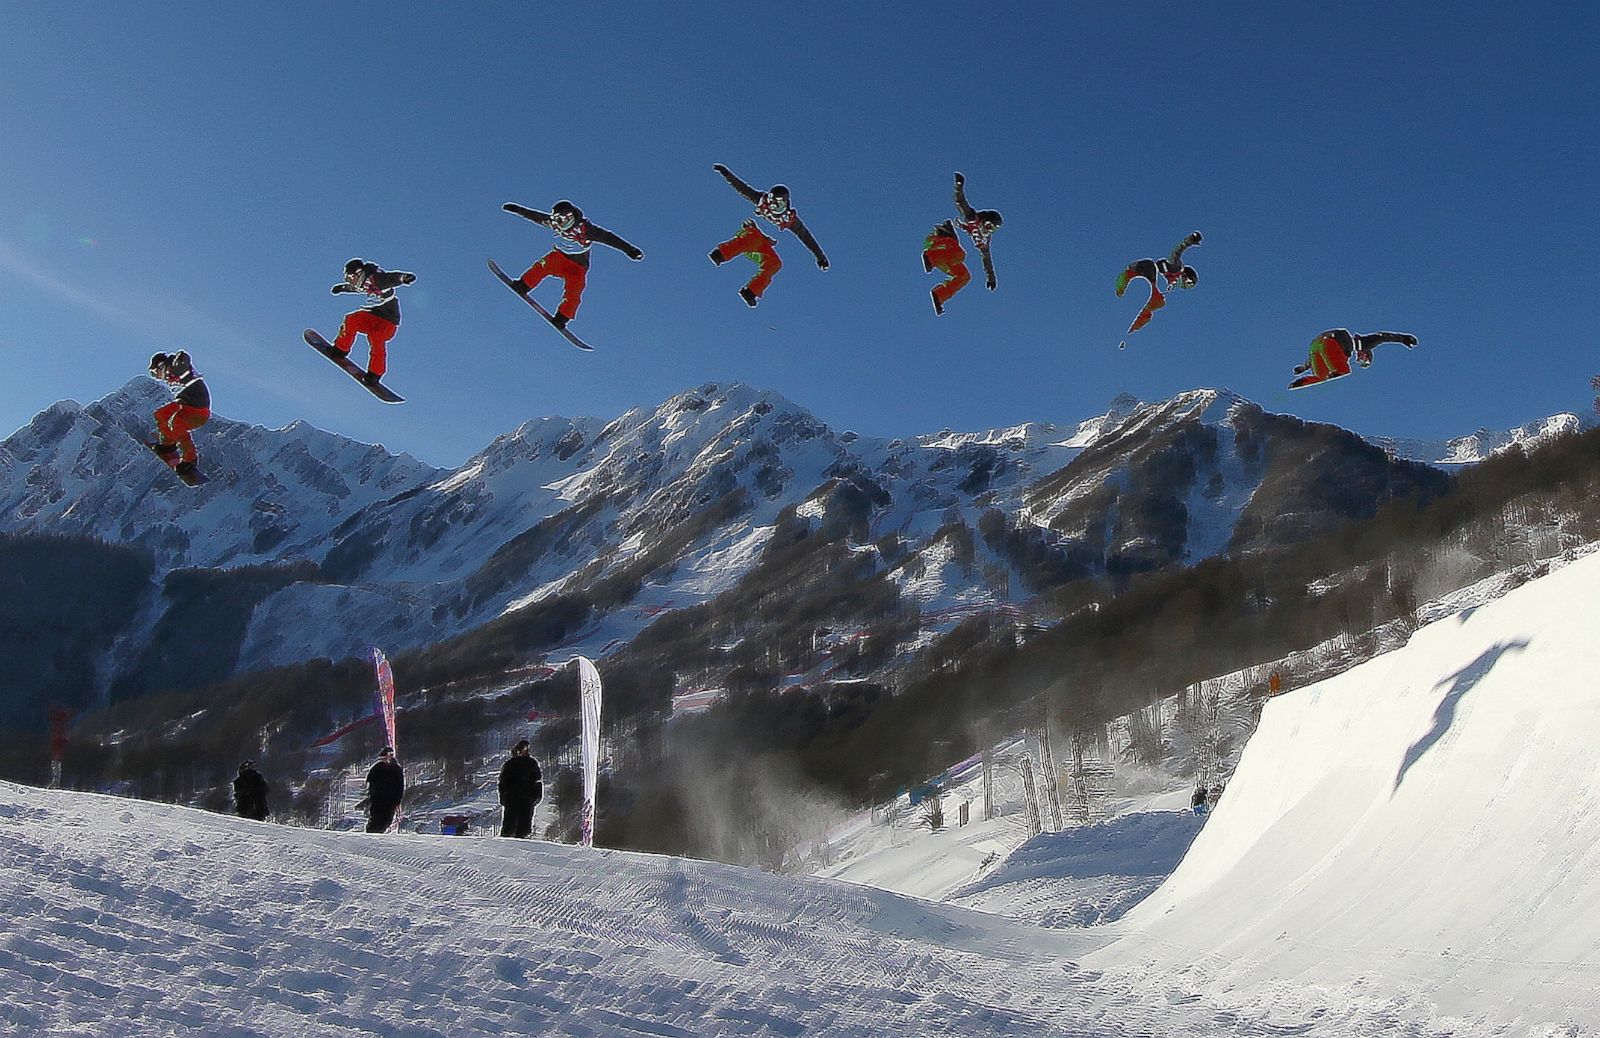 Multiple Exposures from Sochi Photos | Image #8 - ABC News